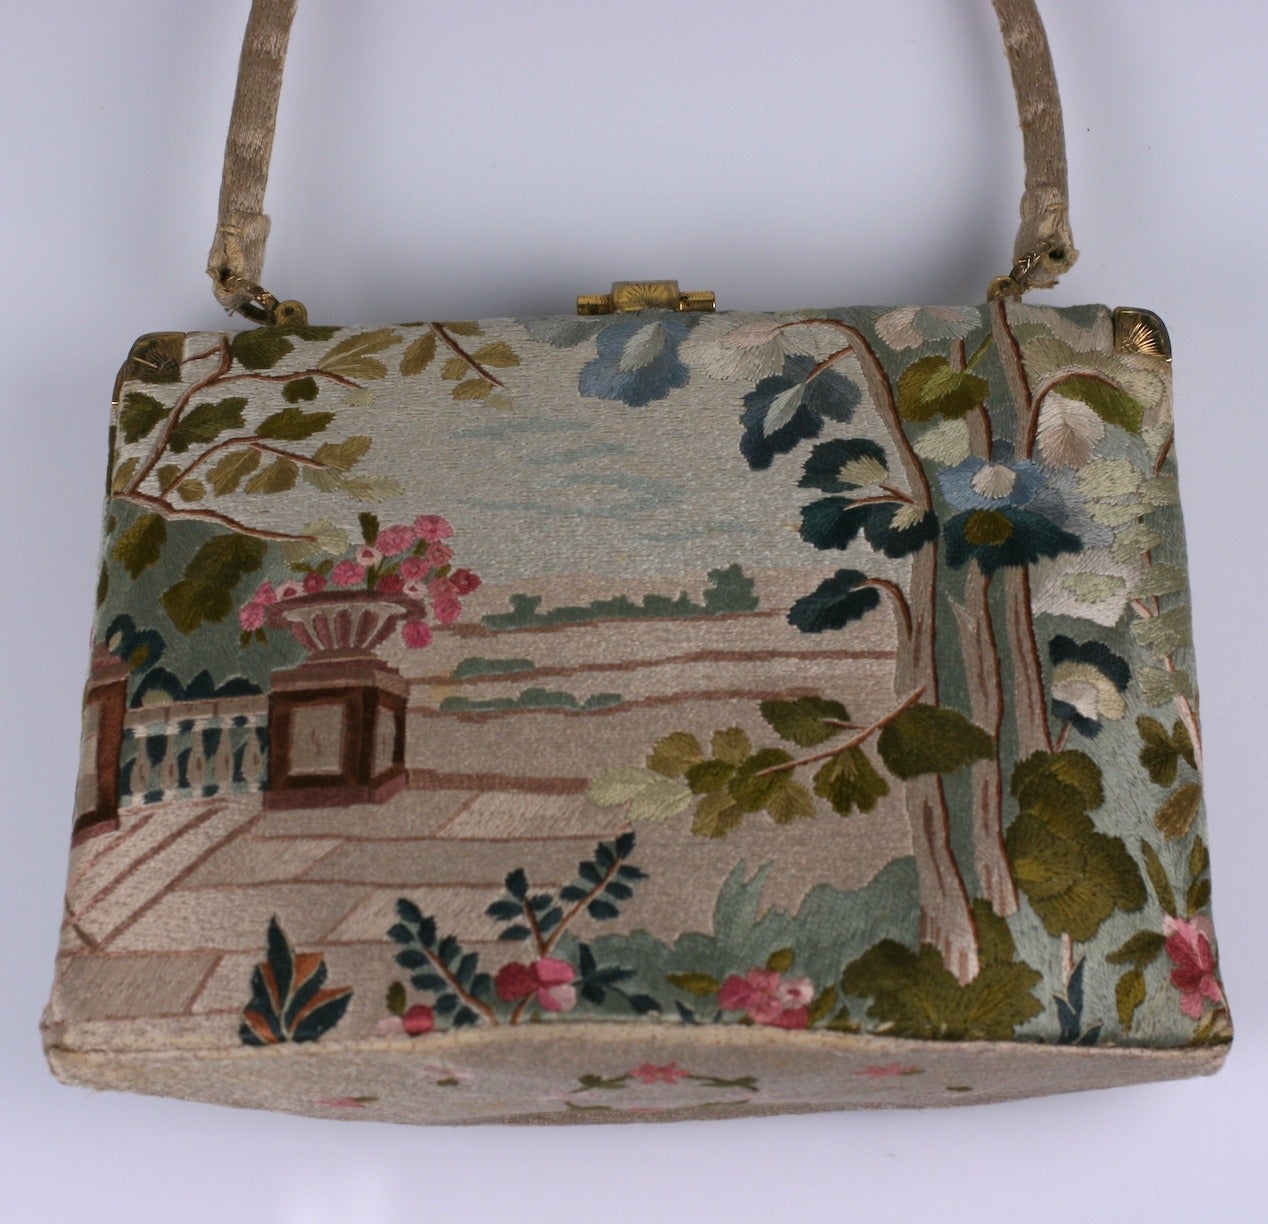 Women's Embroidered Bag with French Courtesans